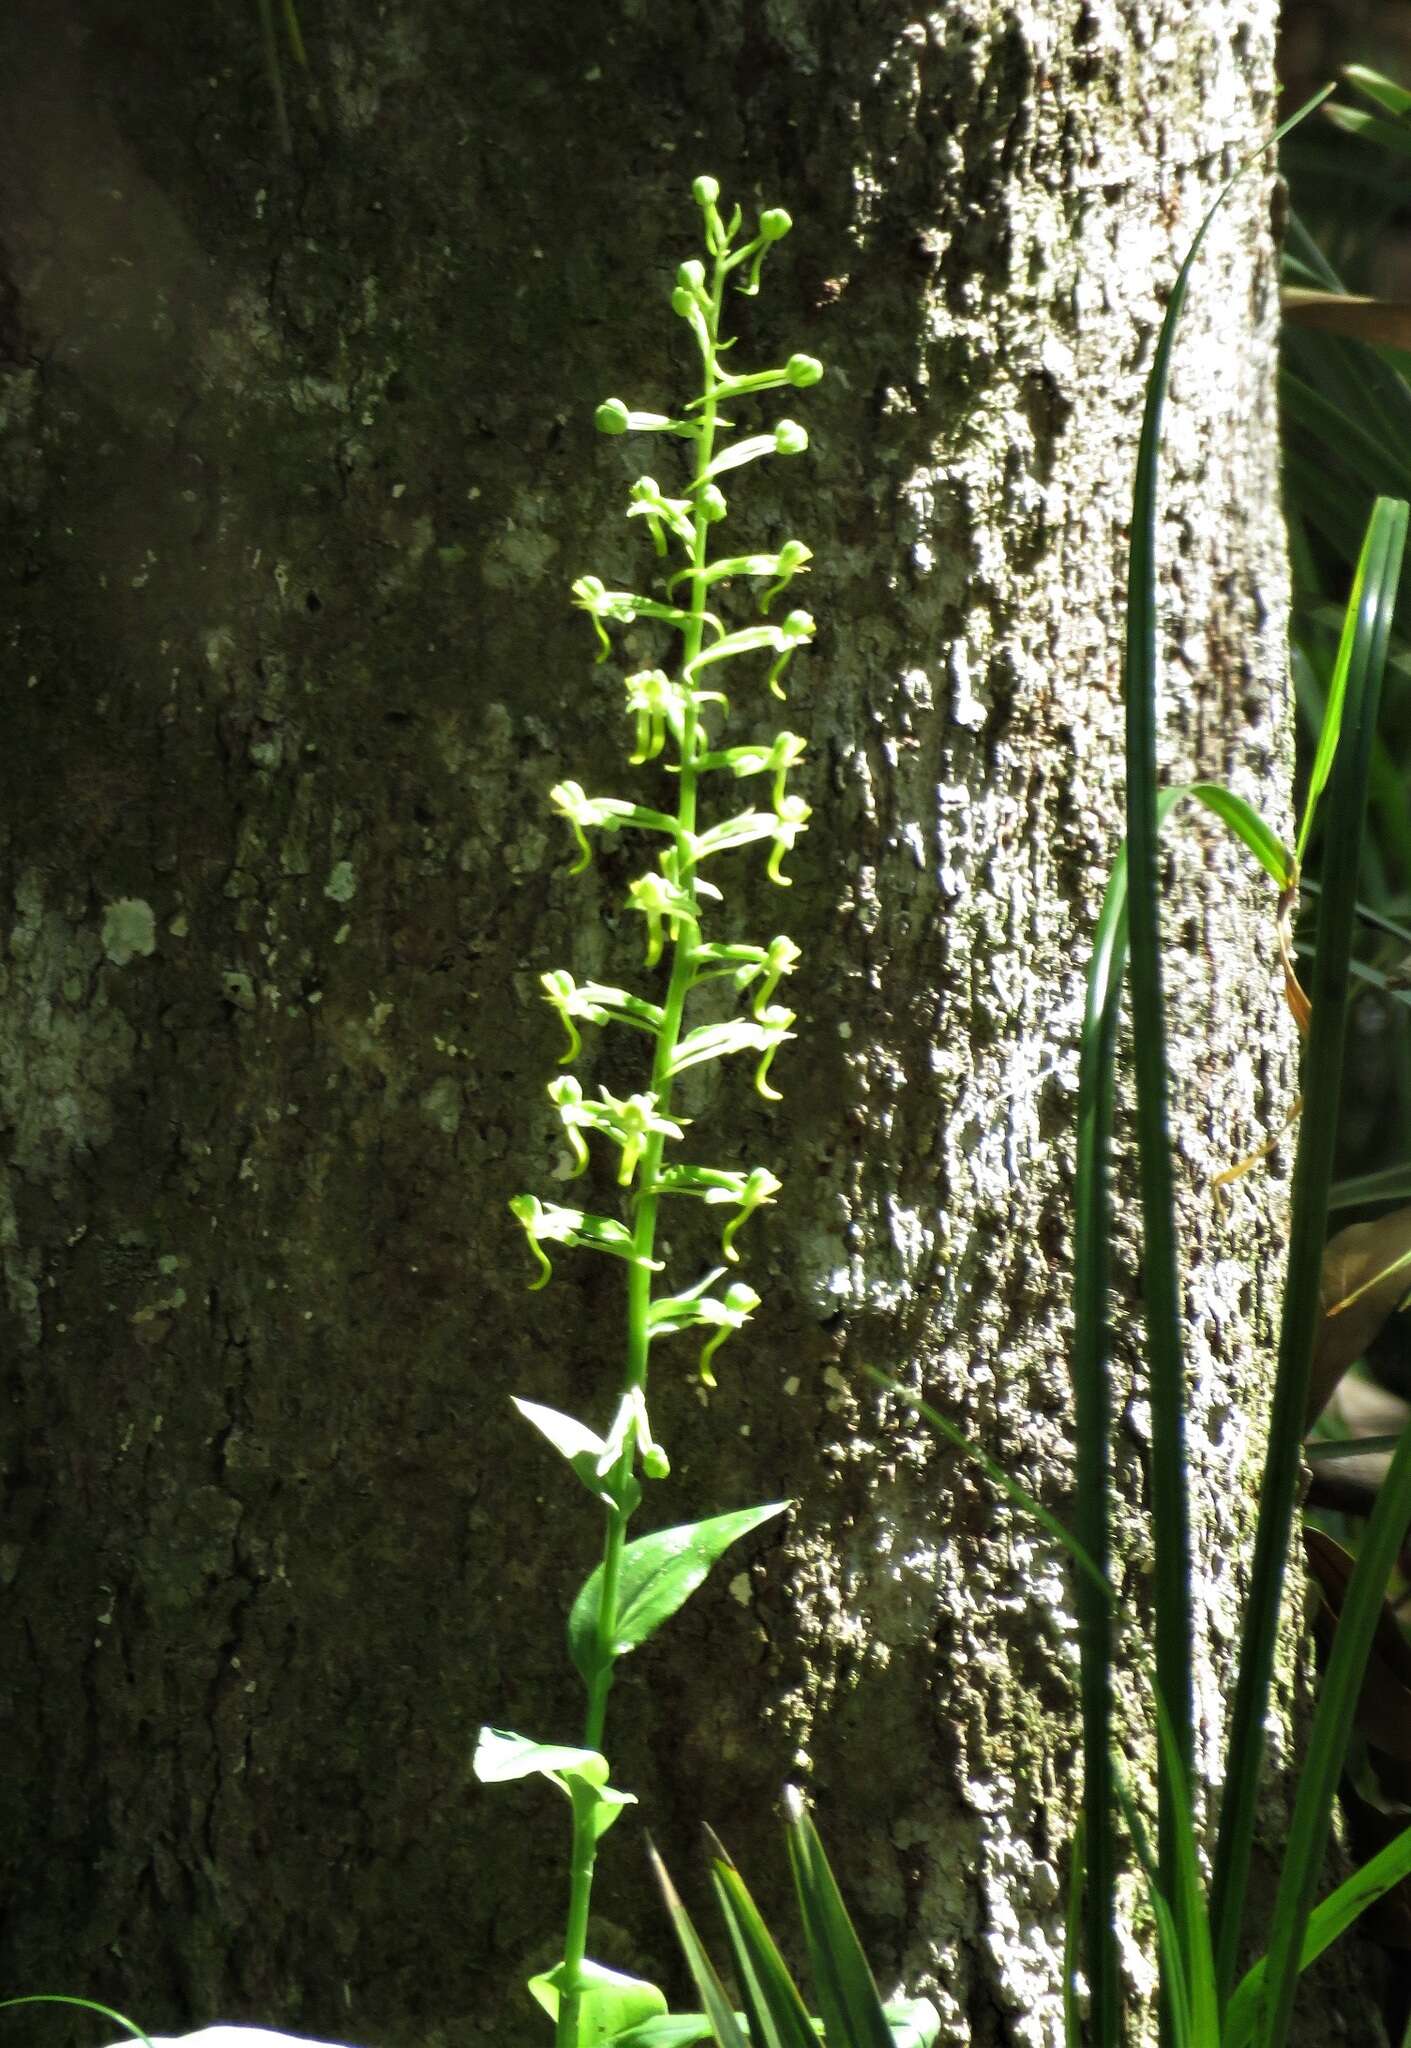 Image of Mignonette orchid